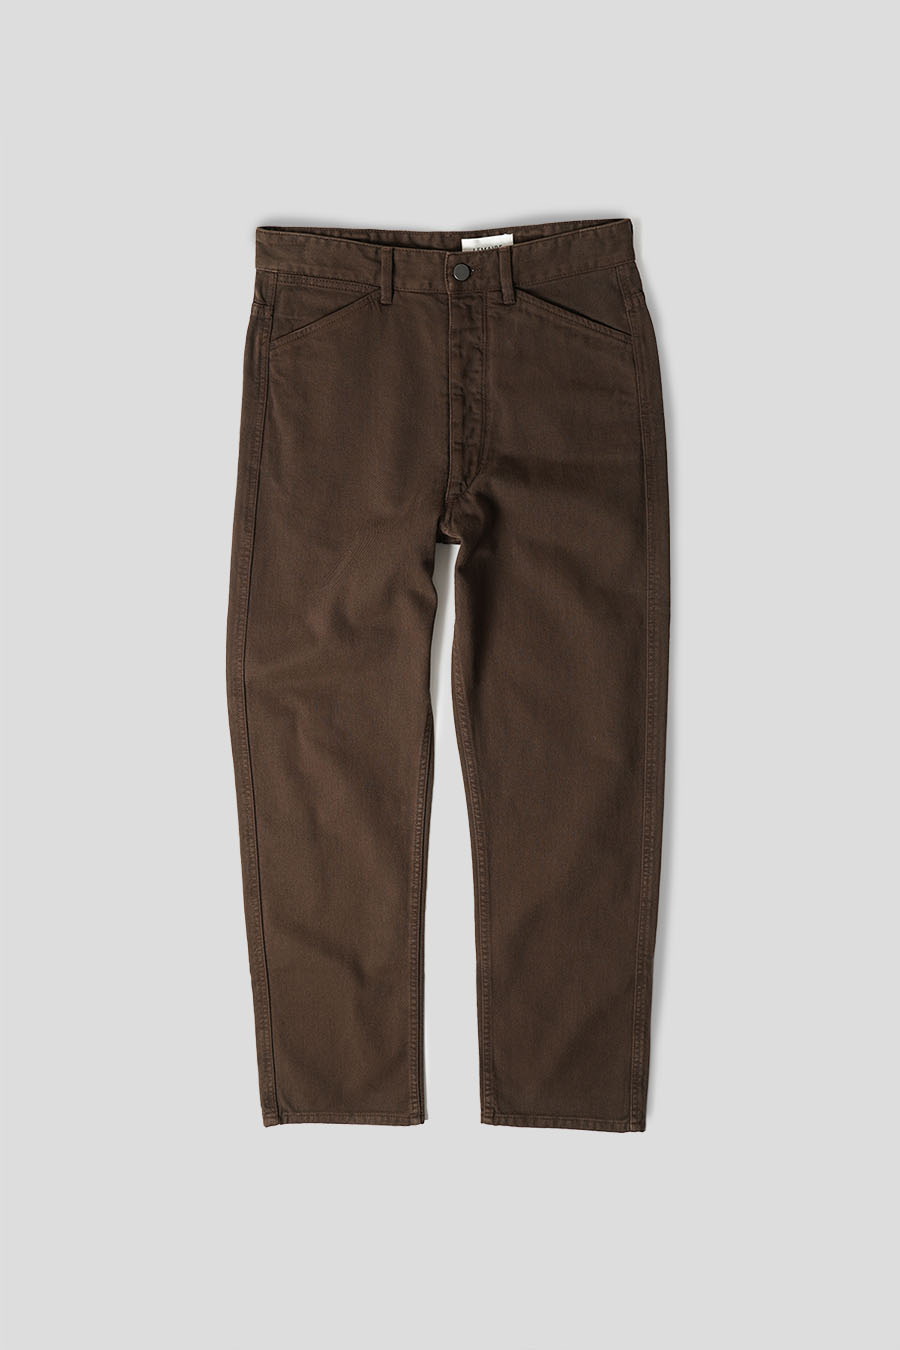 LEMAIRE - ESPRESSO CURVED 5 POCKETS PANTS